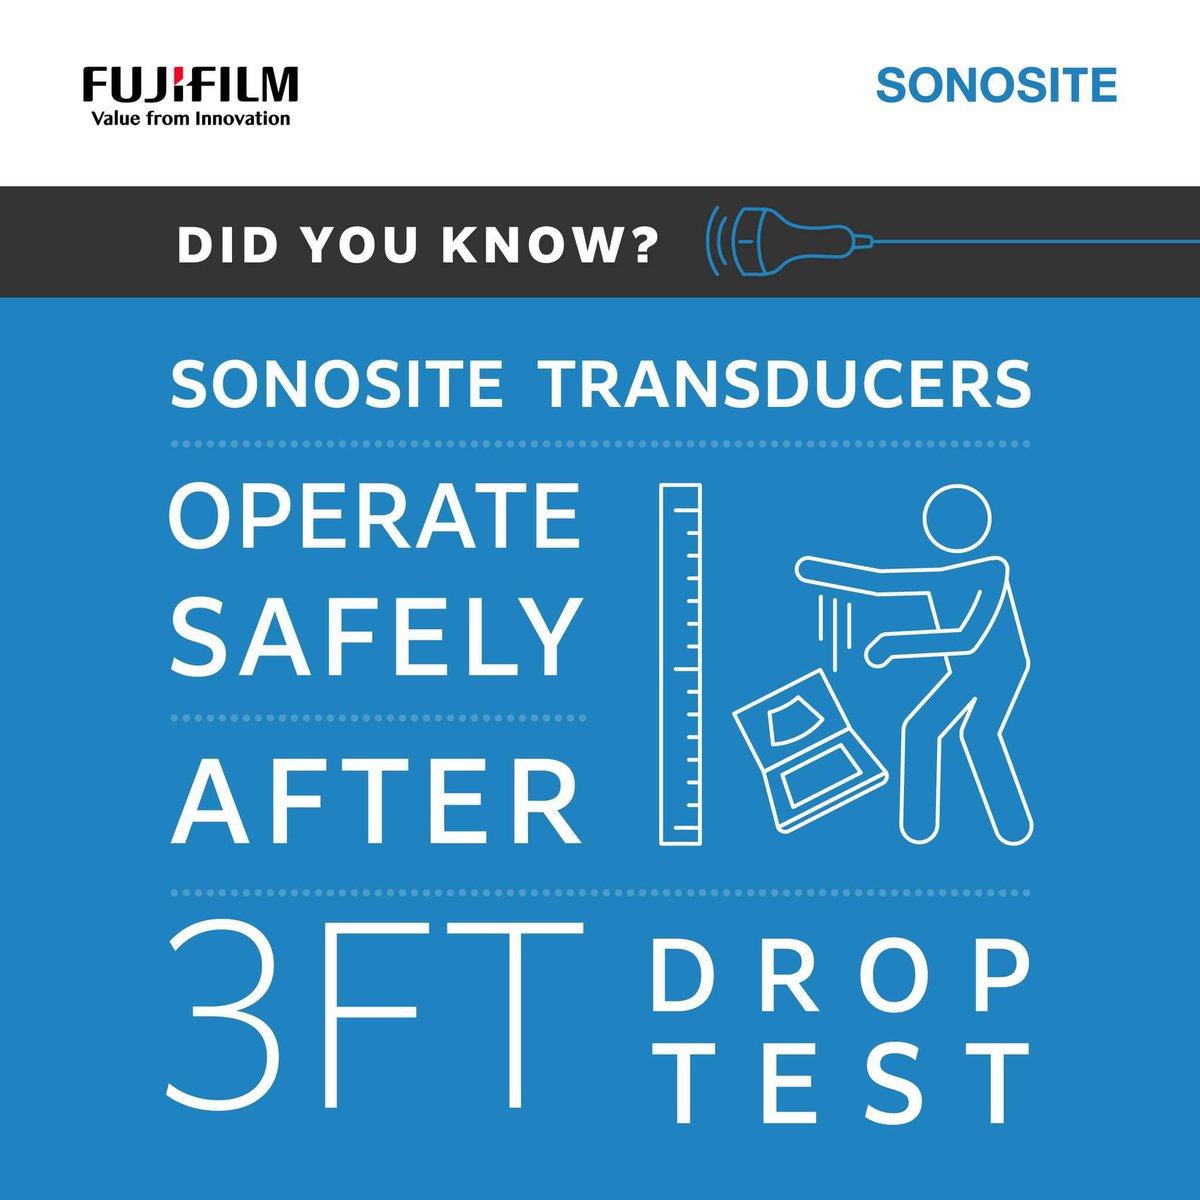 Ever wondered what goes into ensuring the durability of Sonosite transducers? Take a behind-the-scenes look at our testing process and discover how they're built to last: bit.ly/4dj1C1F

#UltrasoundTransducer #MedicalDevice #MedDevice #PointOfCareUltrasound